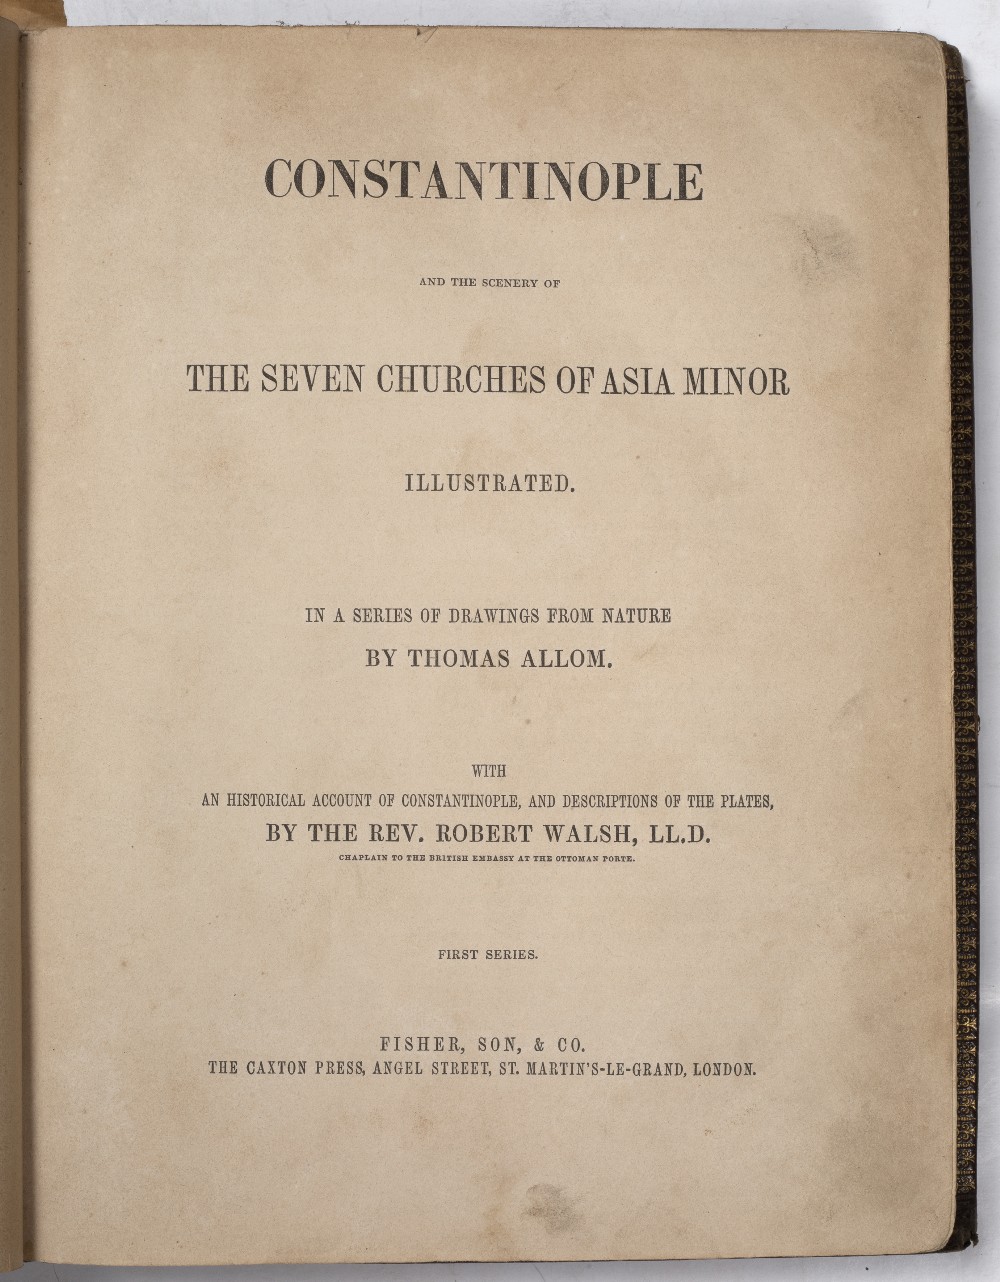 Book Walsh, Rev. Robert, Constantinople and the scenery of the seven churches of Asia Minor, - Image 2 of 5